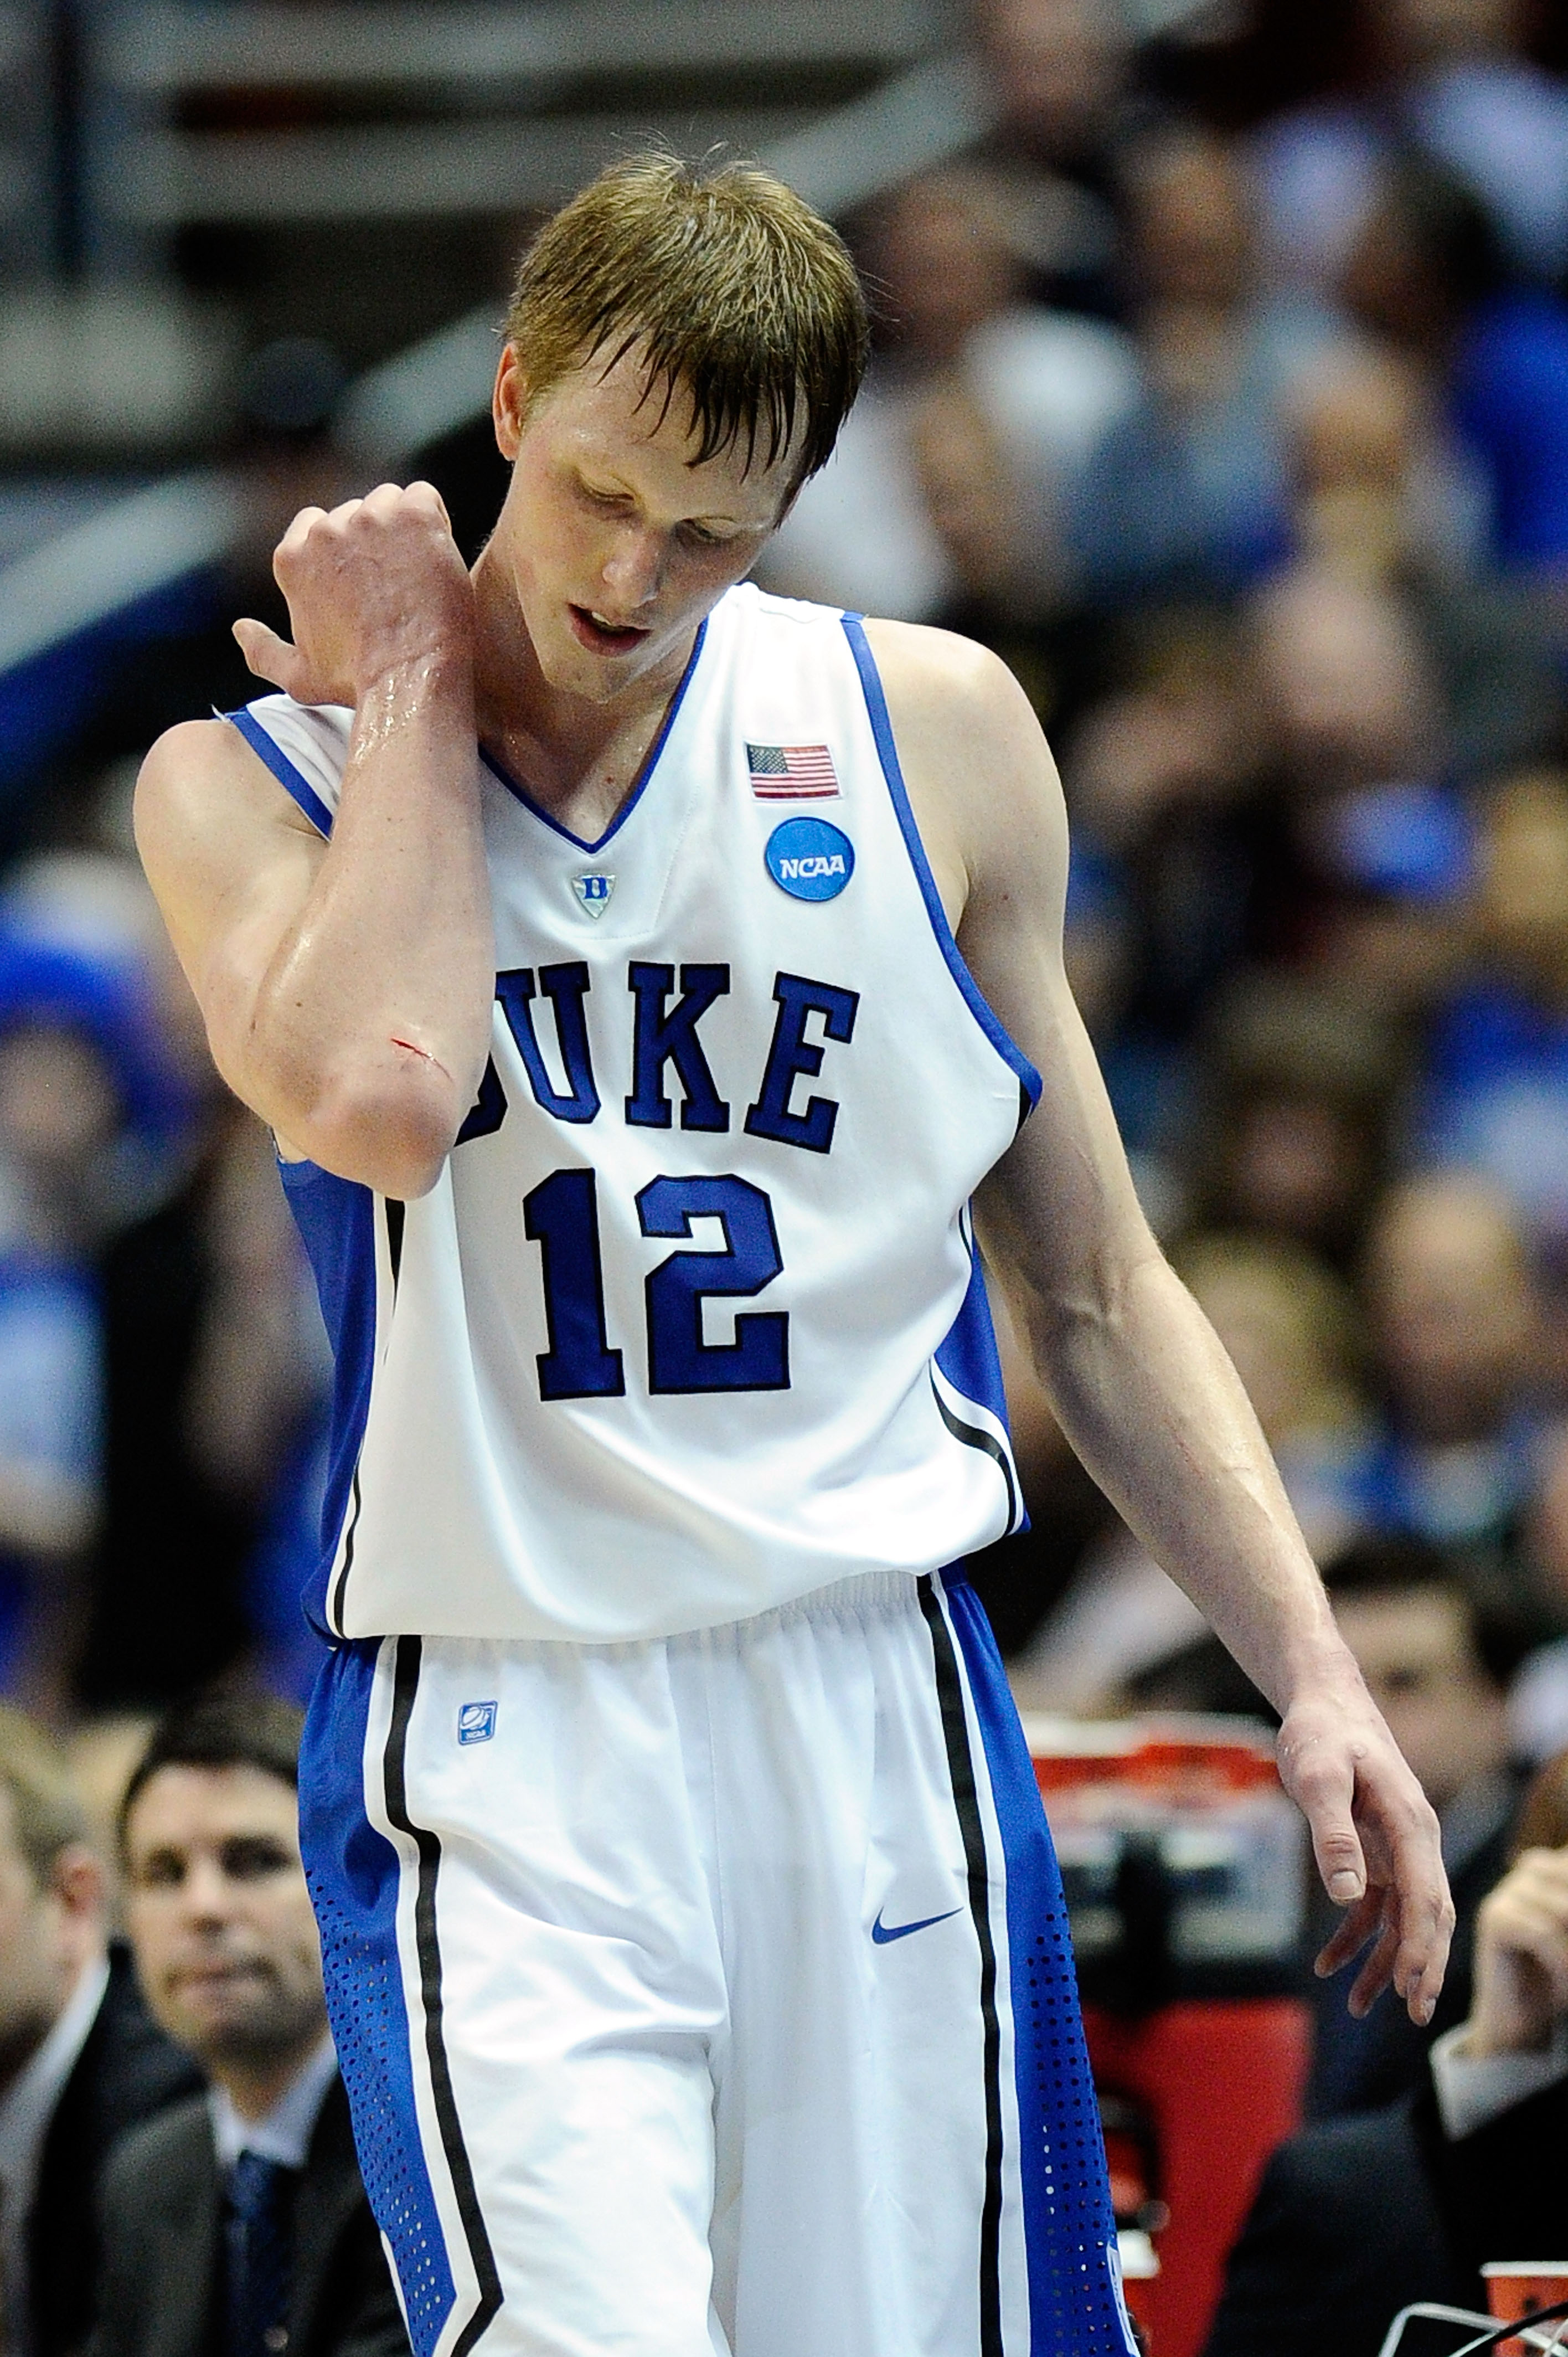 ANAHEIM, CA - MARCH 24:  Kyle Singler #12 of the Duke Blue Devils looks at a cut on his elbow while playing against the Arizona Wildcats during the west regional semifinal of the 2011 NCAA men's basketball tournament at the Honda Center on March 24, 2011